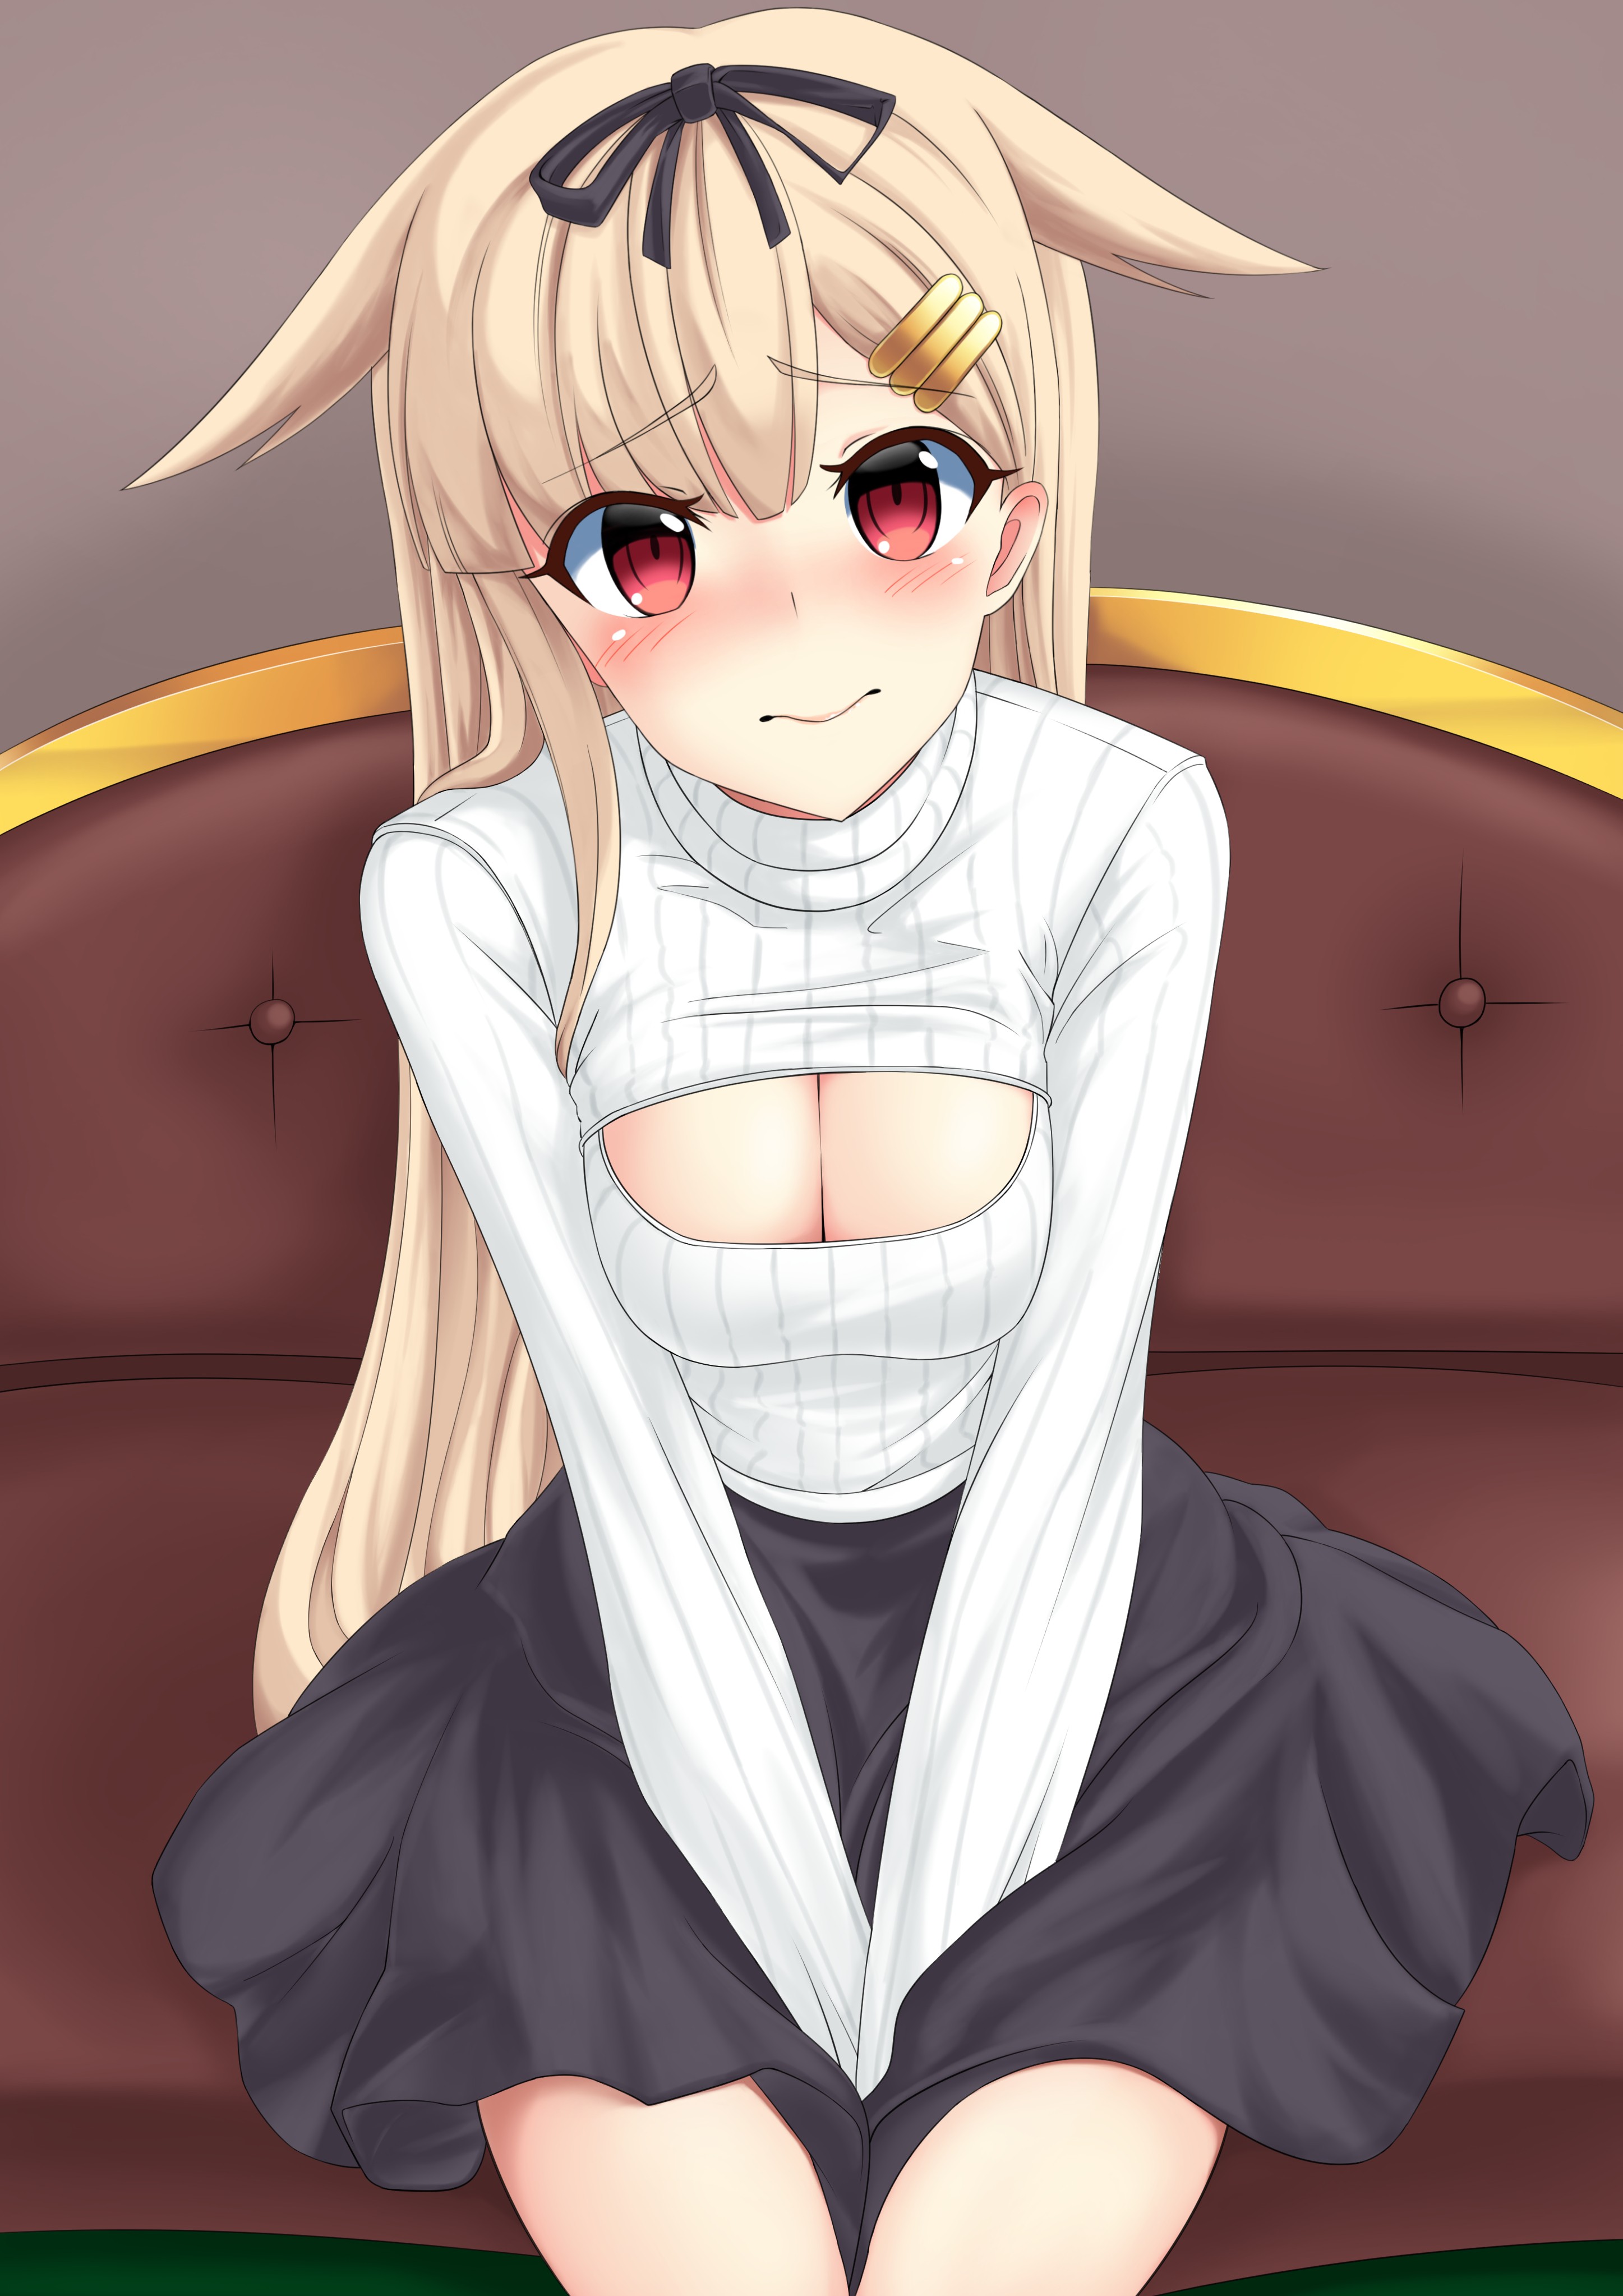 Anime 2894x4093 anime anime girls Kantai Collection Yuudachi (KanColle) open shirt long hair blonde red eyes skirt cleavage holding boobs